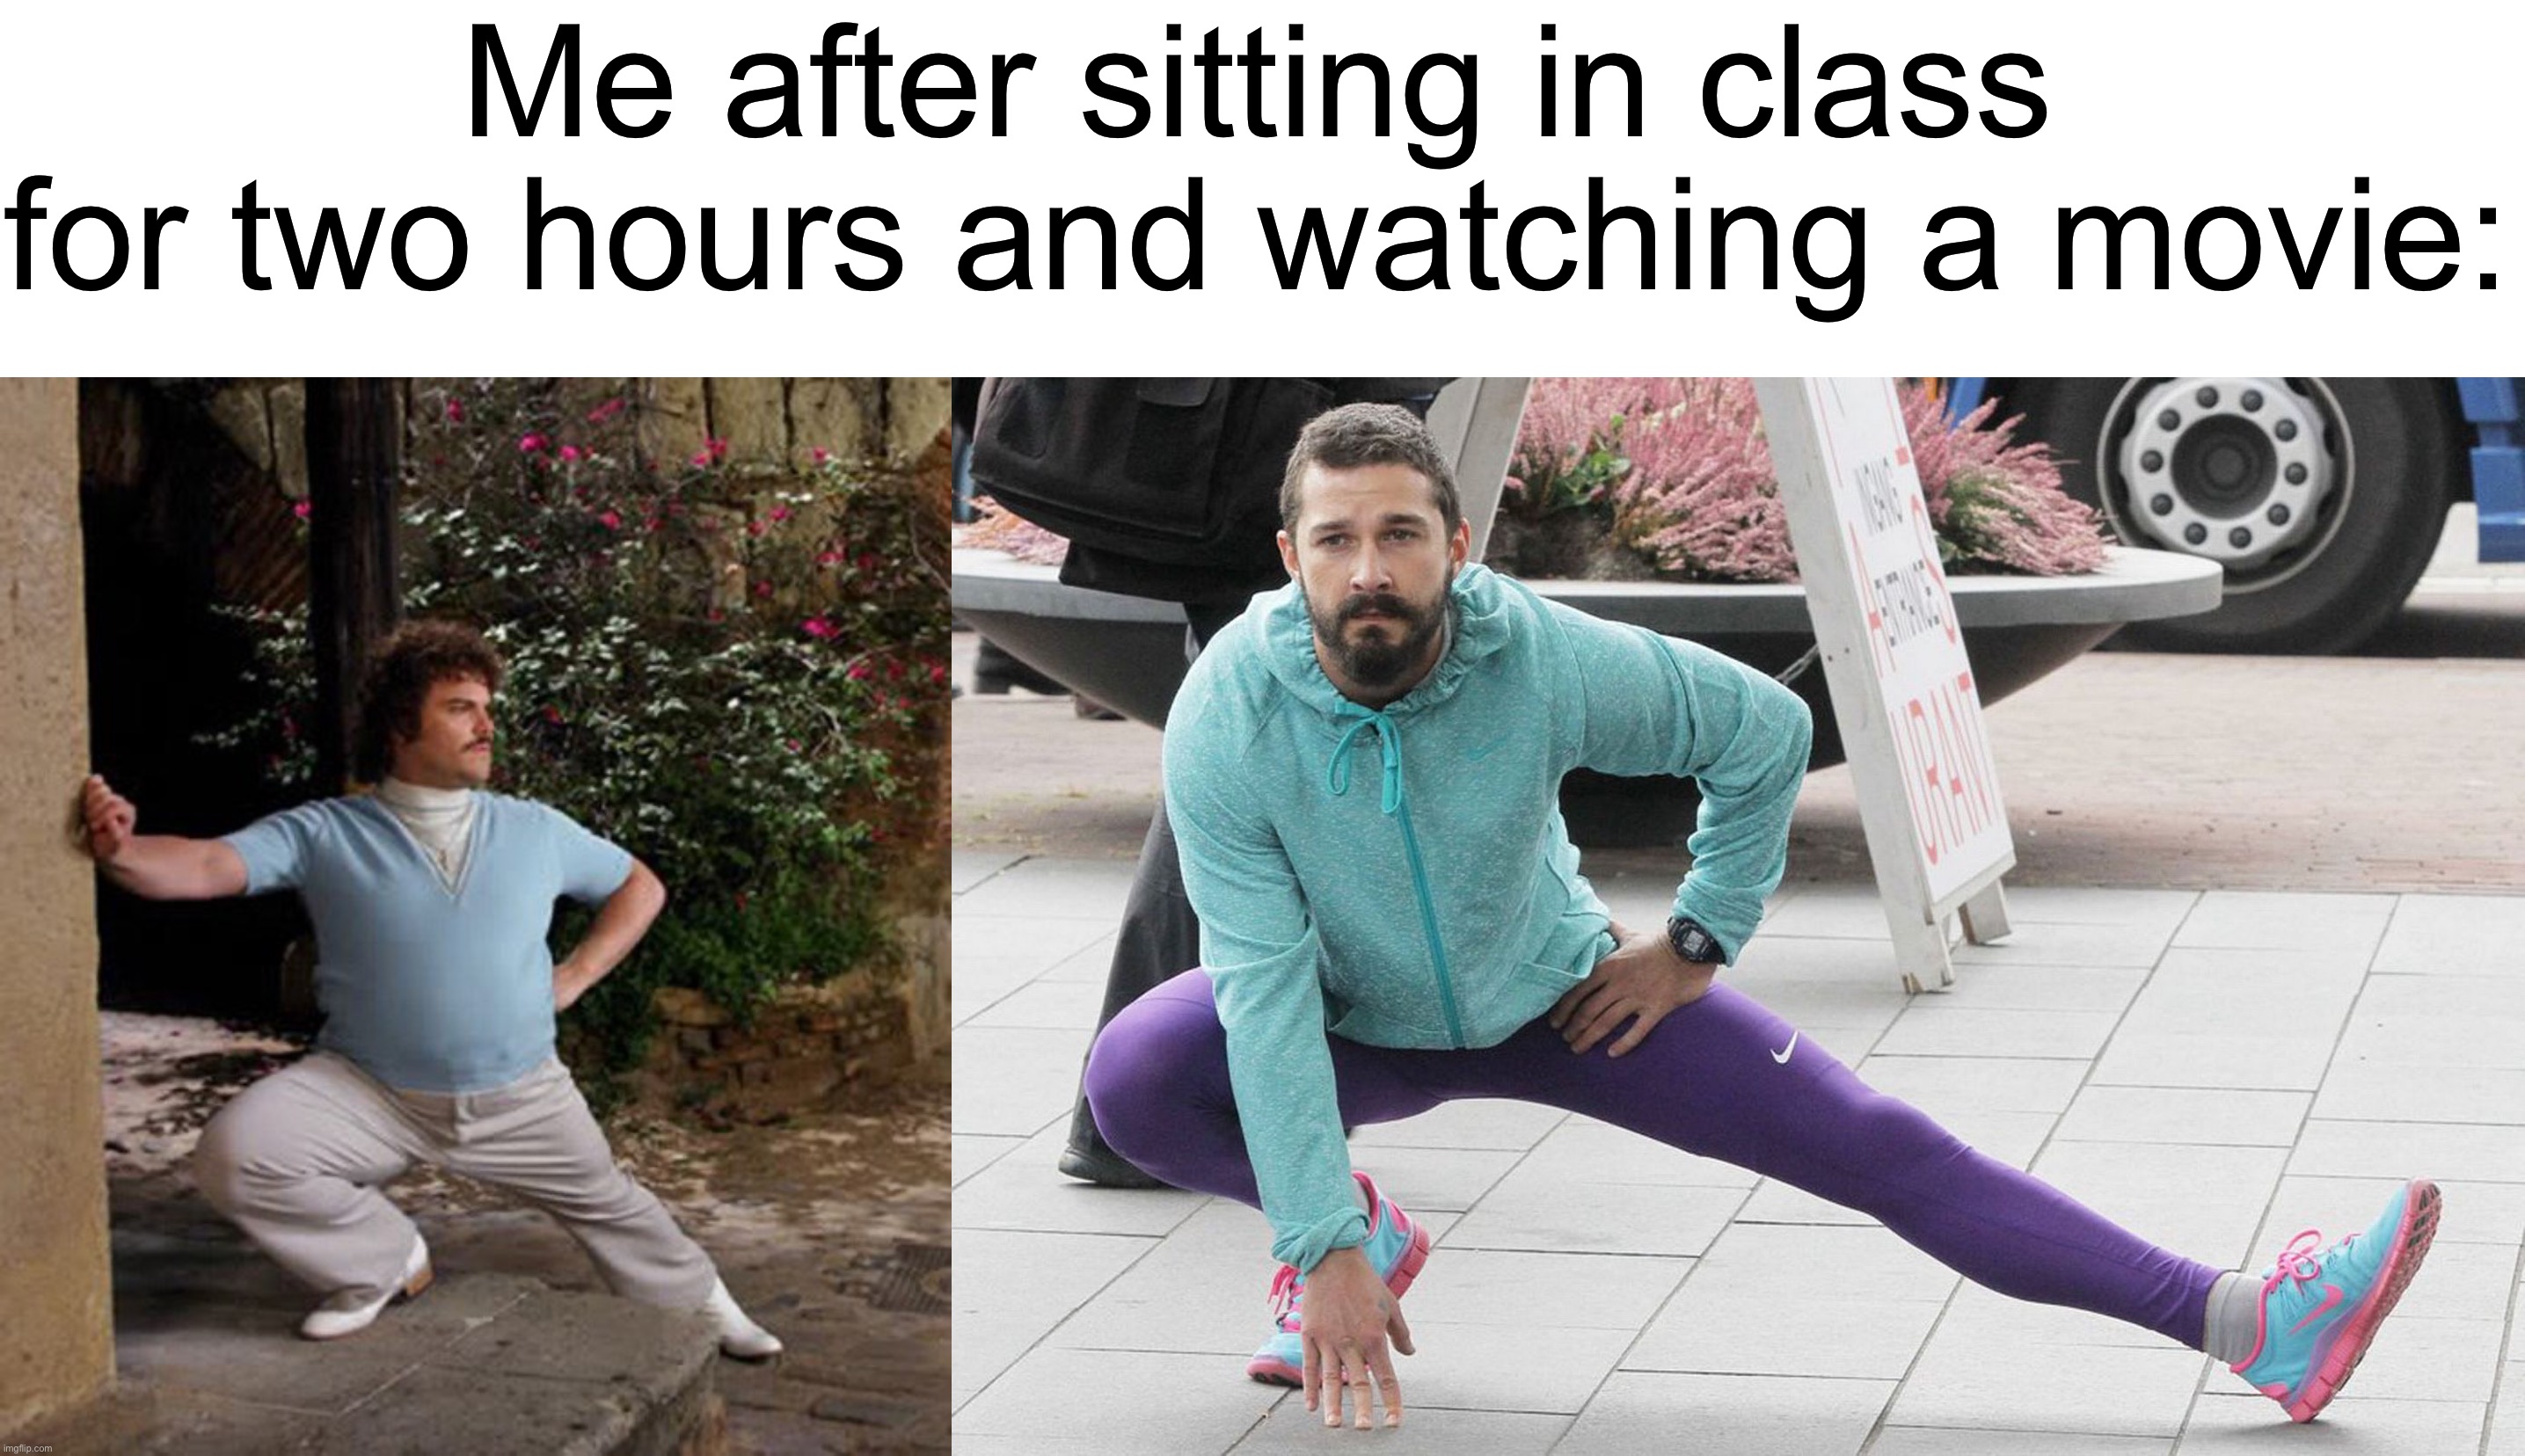 It feels so good to stretch after long periods of time | Me after sitting in class for two hours and watching a movie: | image tagged in memes,funny,true story,relatable memes,school,stretch | made w/ Imgflip meme maker